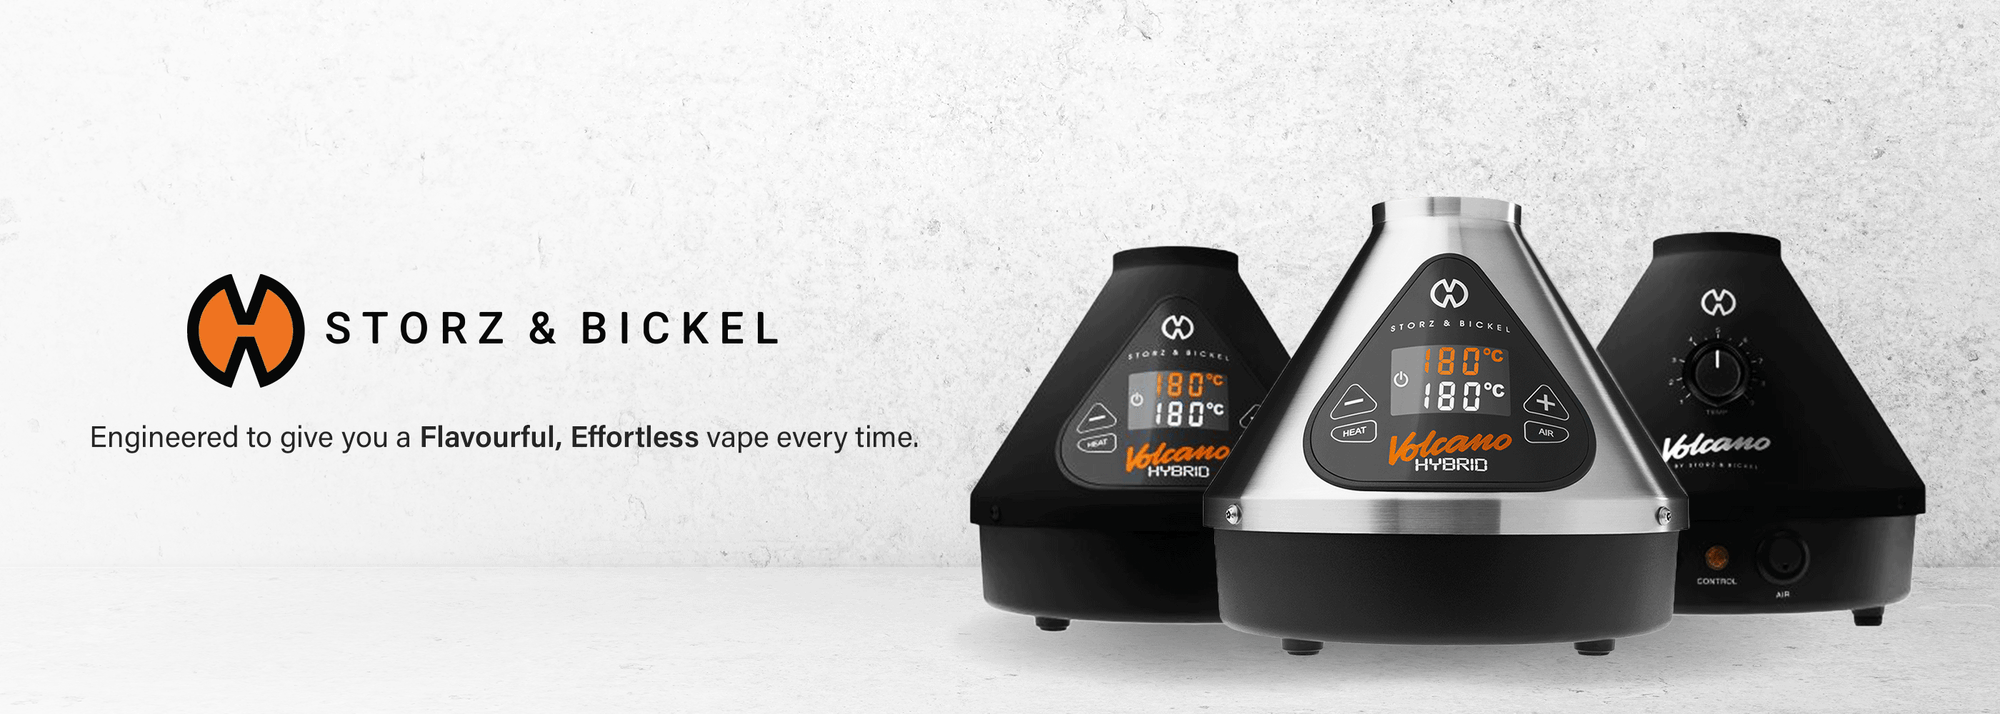 Buy Storz and Bickel Dry Herb Vaporizers - Wick and Wire Co Melbourne Vape Shops, Victoria Australia